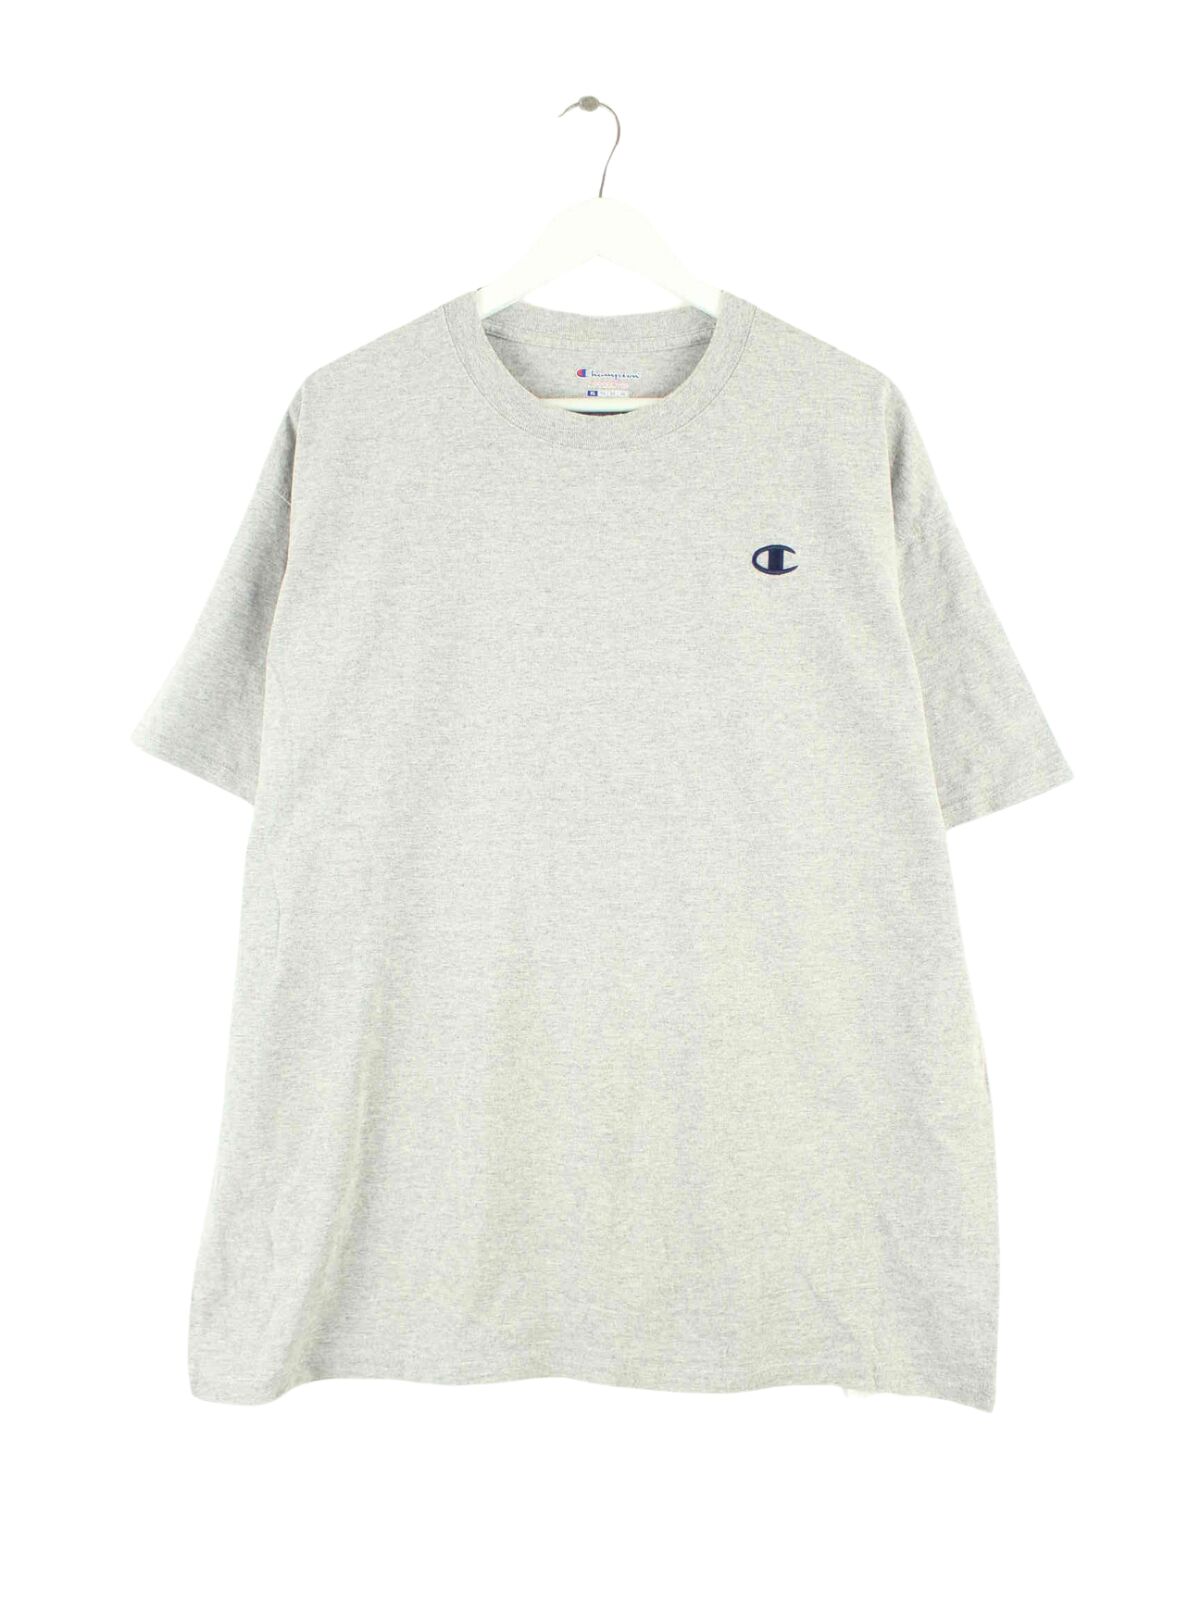 Champion Embroidered T-Shirt Grau XL (front image)